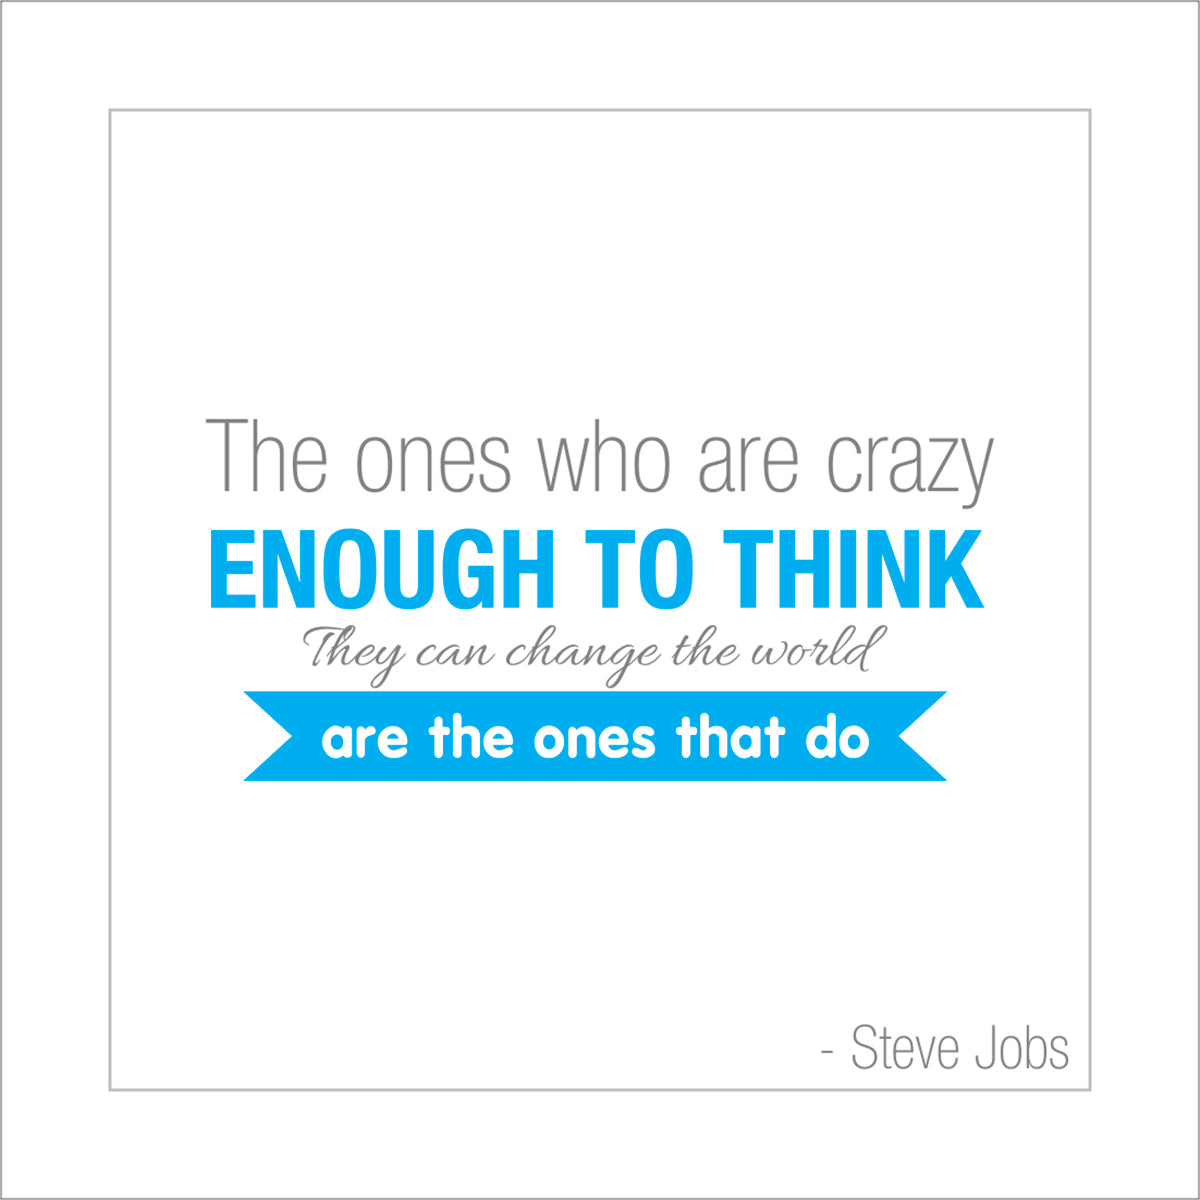 The ones who are crazy enough to think they can change the world, are the ones that do.